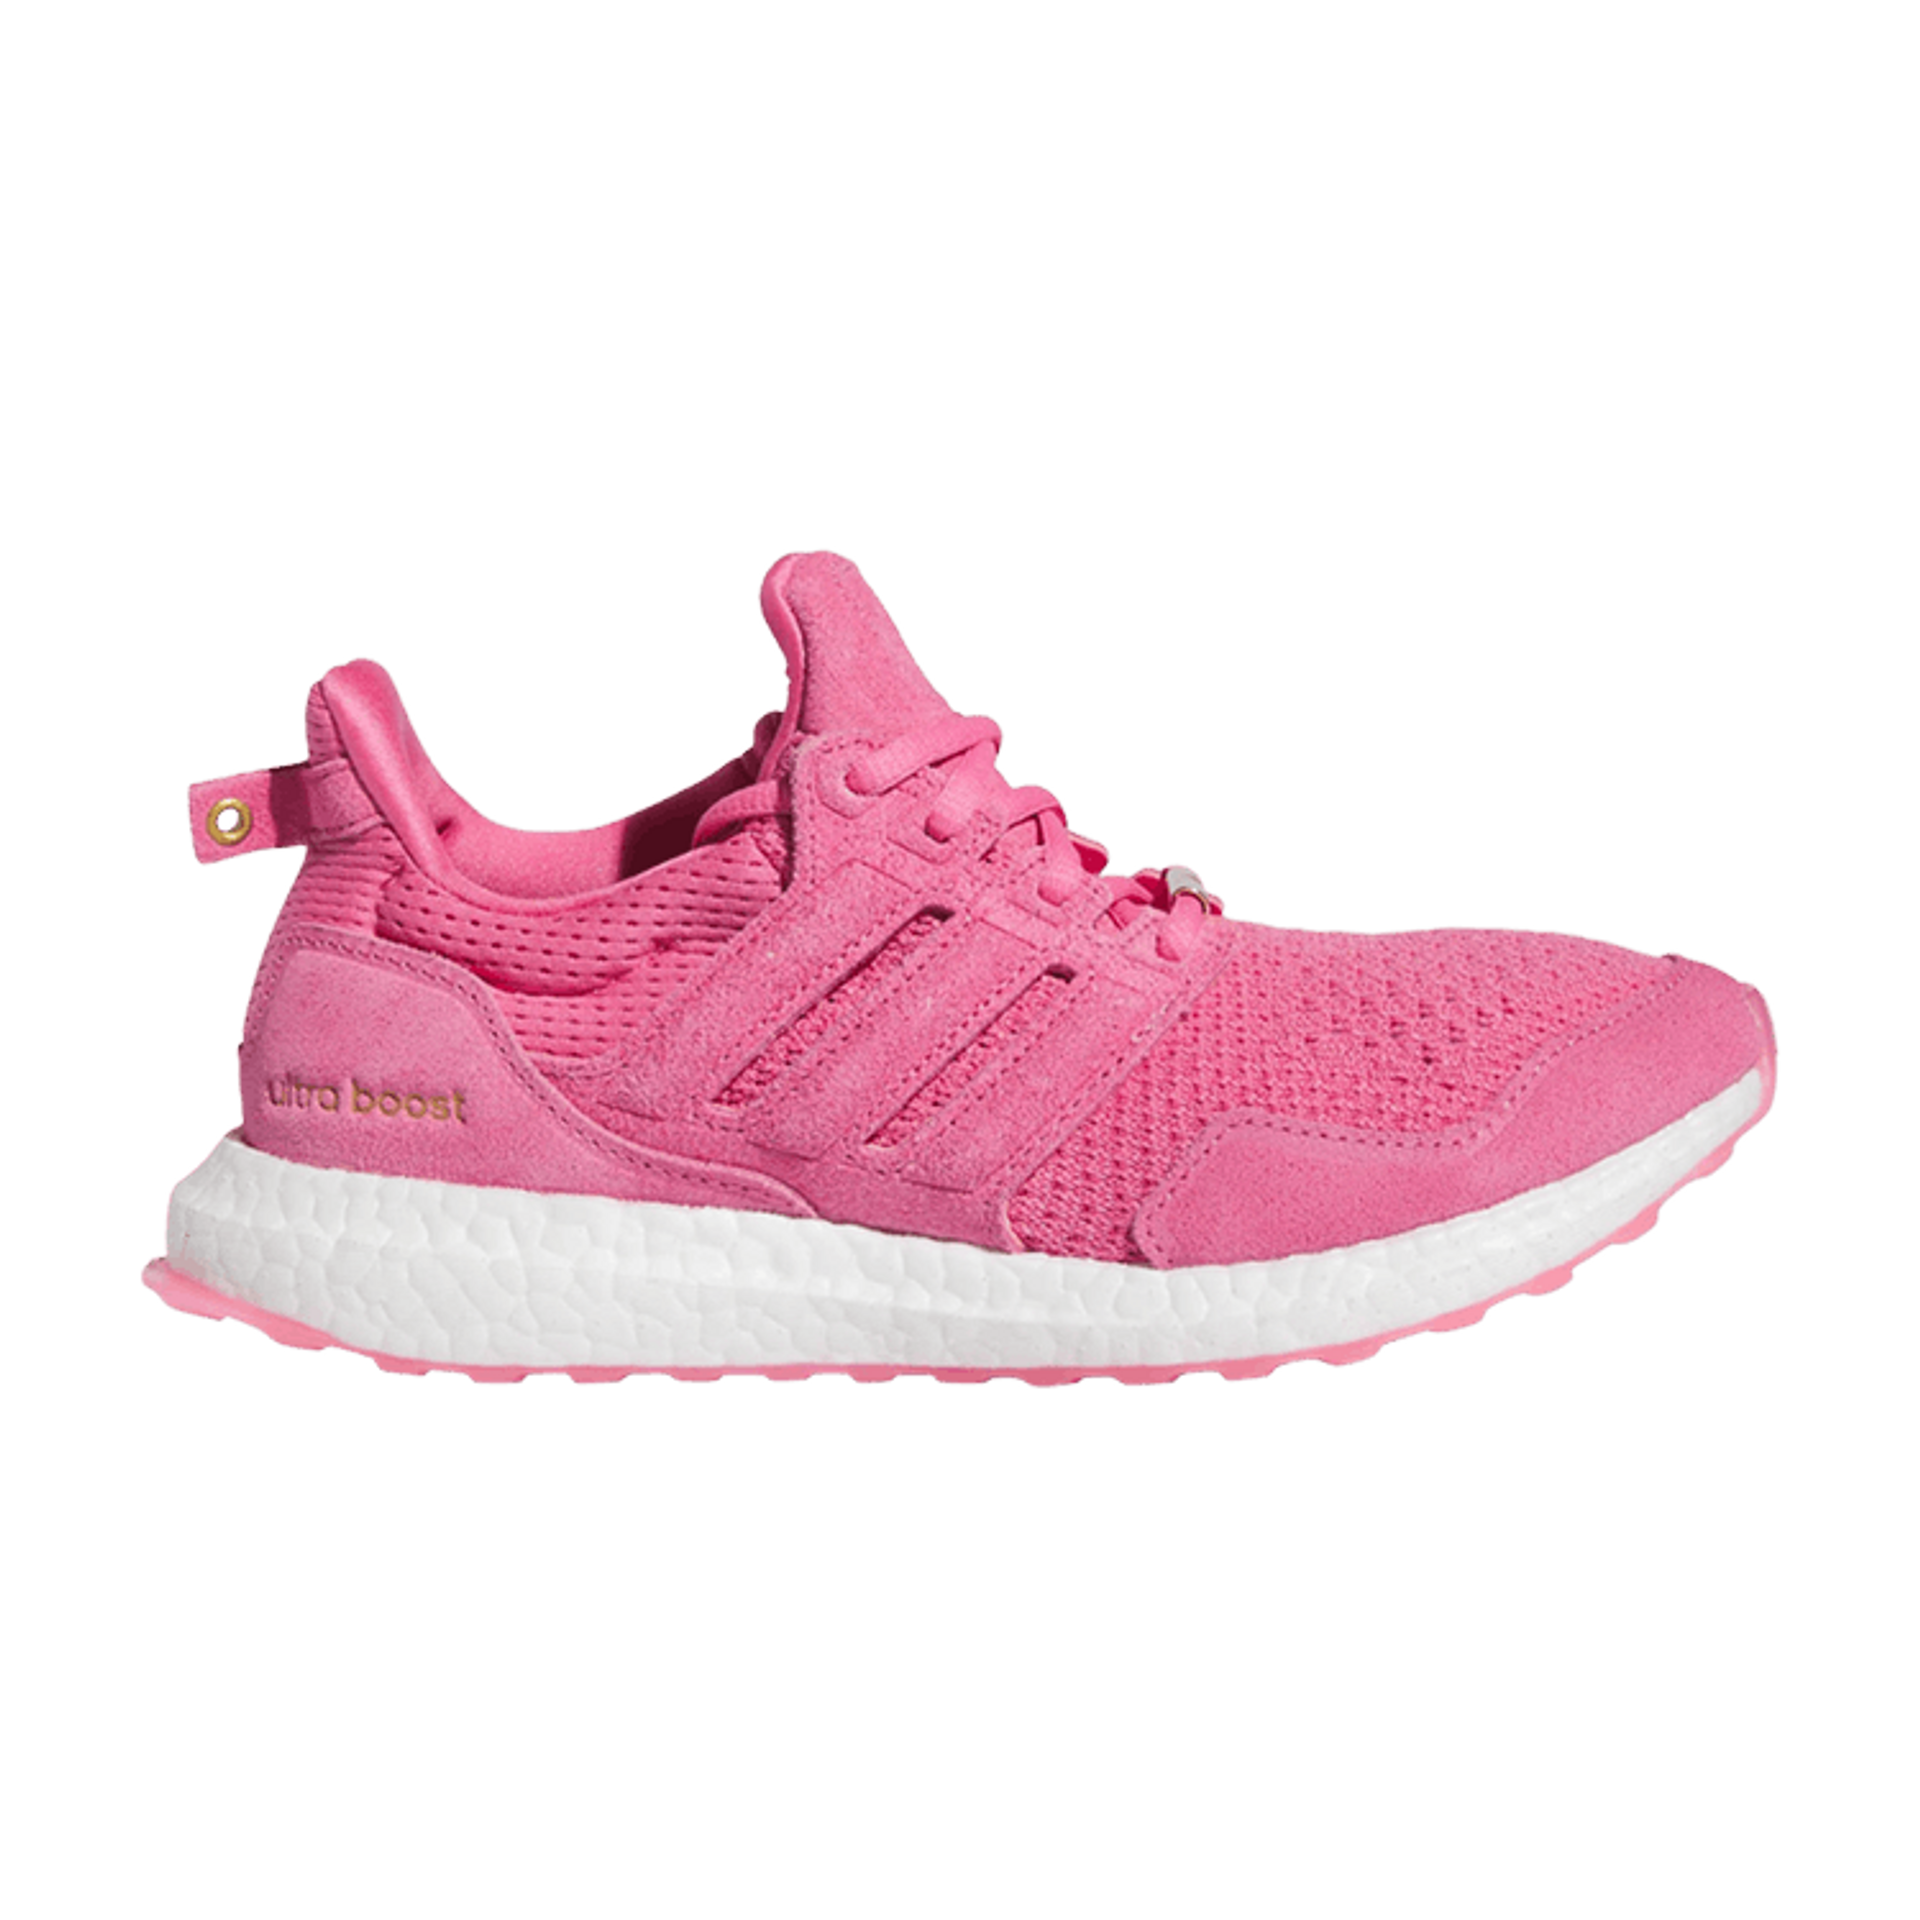 Wmns adidas UltraBoost 1.0 'Pink Fusion Gold'